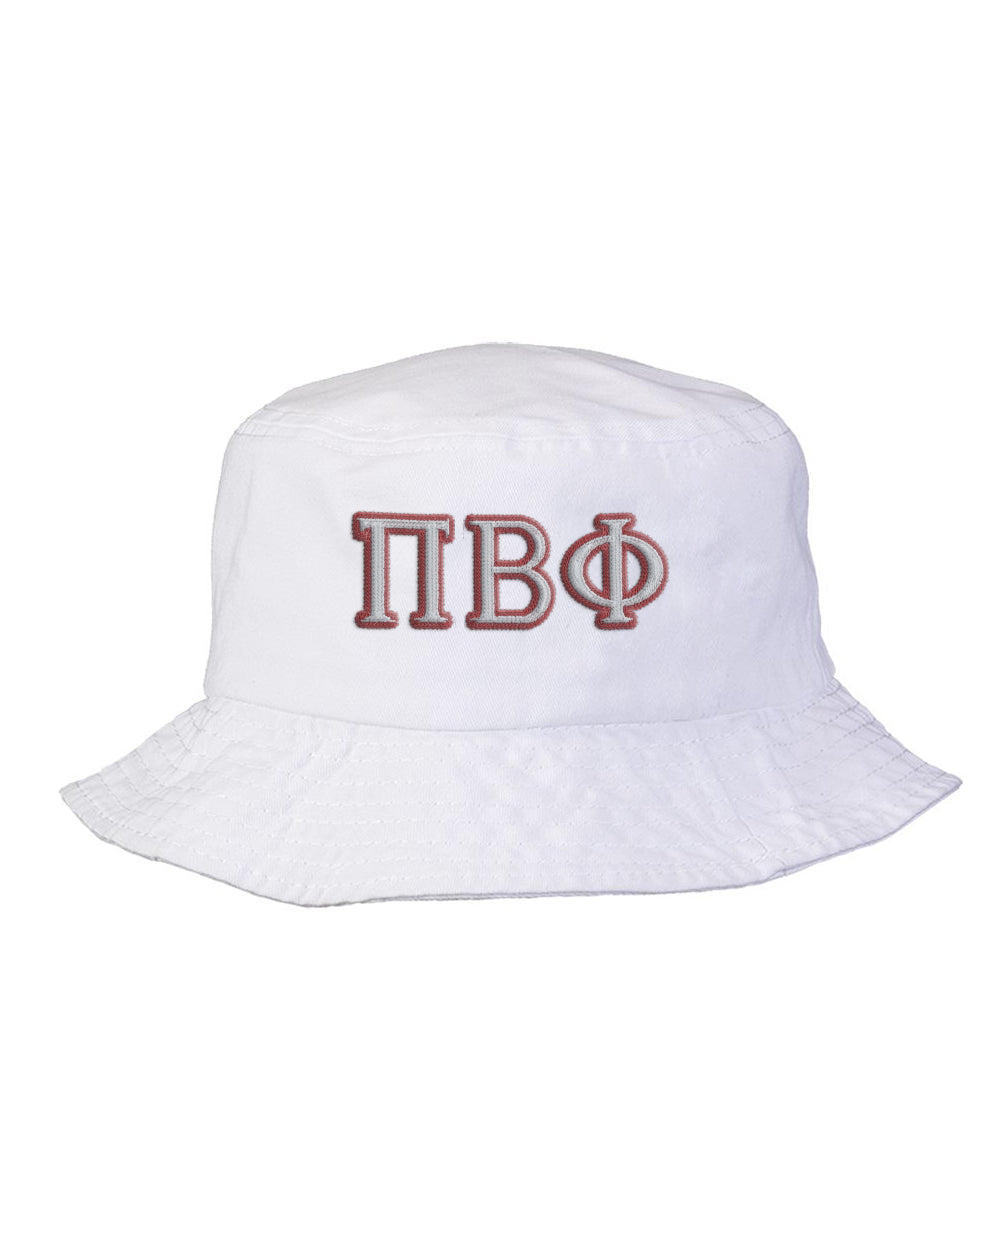 Pi Beta Phi Embroidered Bucket Hat